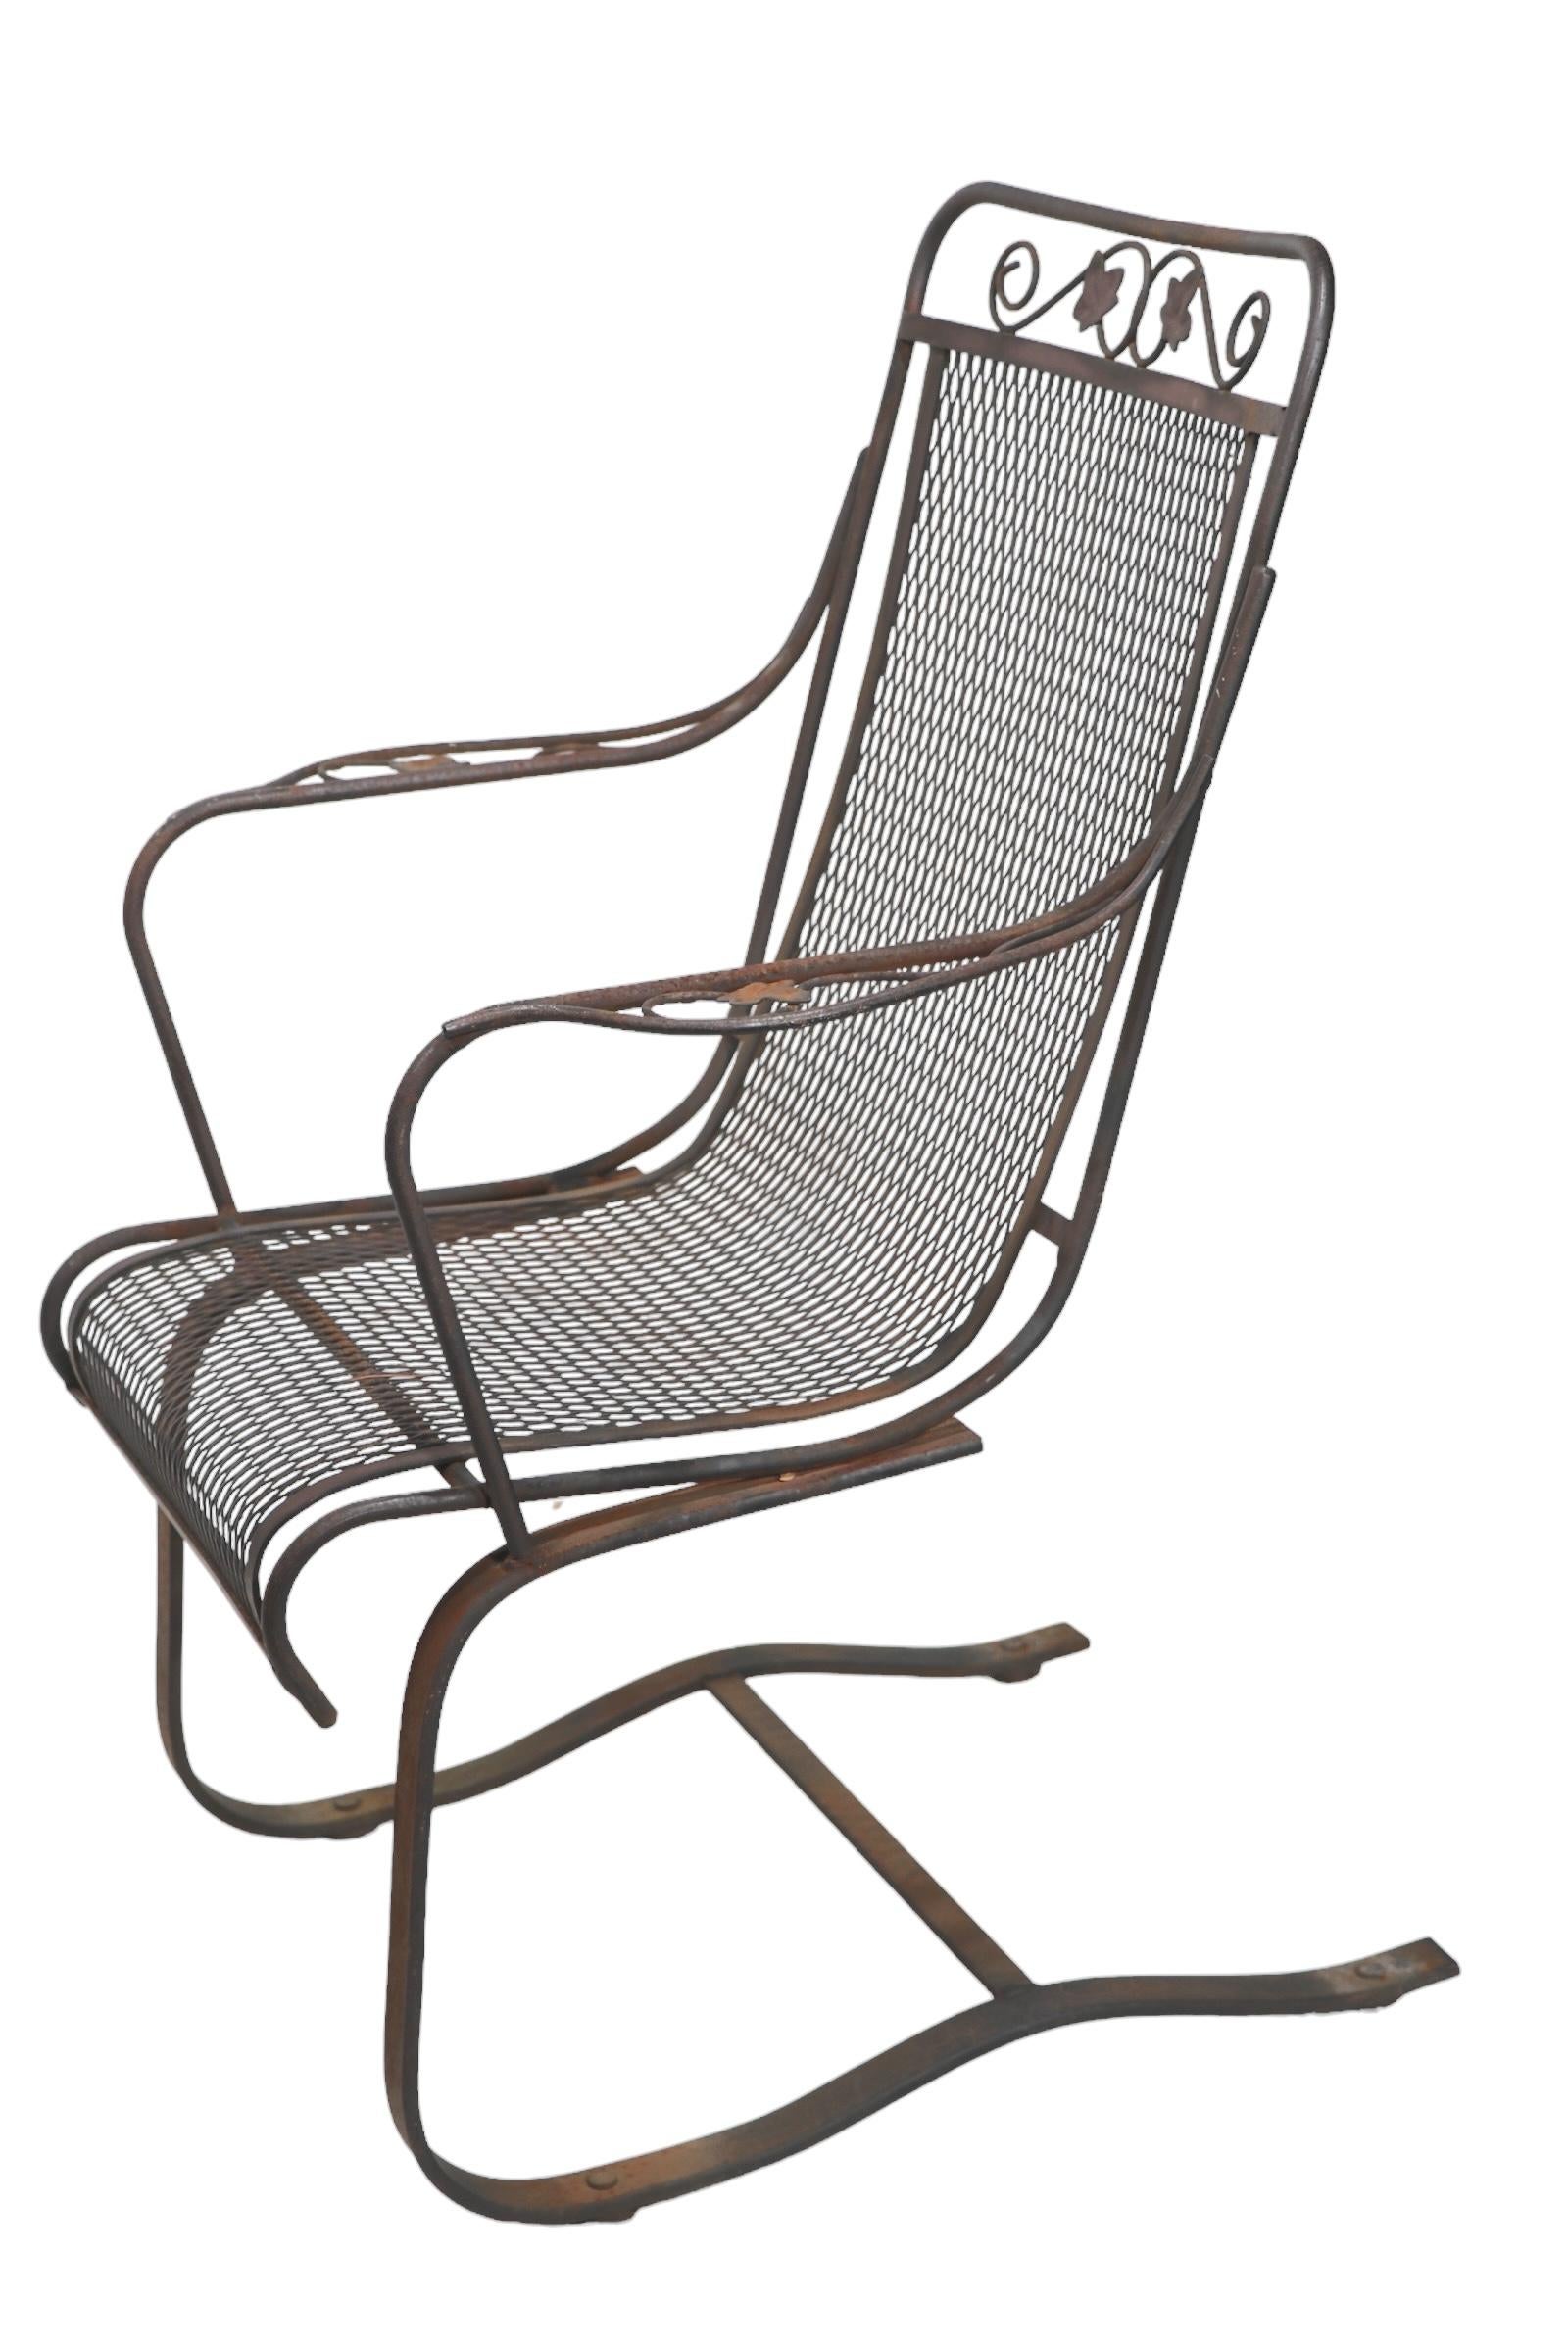 Wrought Iron Cantilevered High Back Lounge Garden Patio Poolside Chair  7